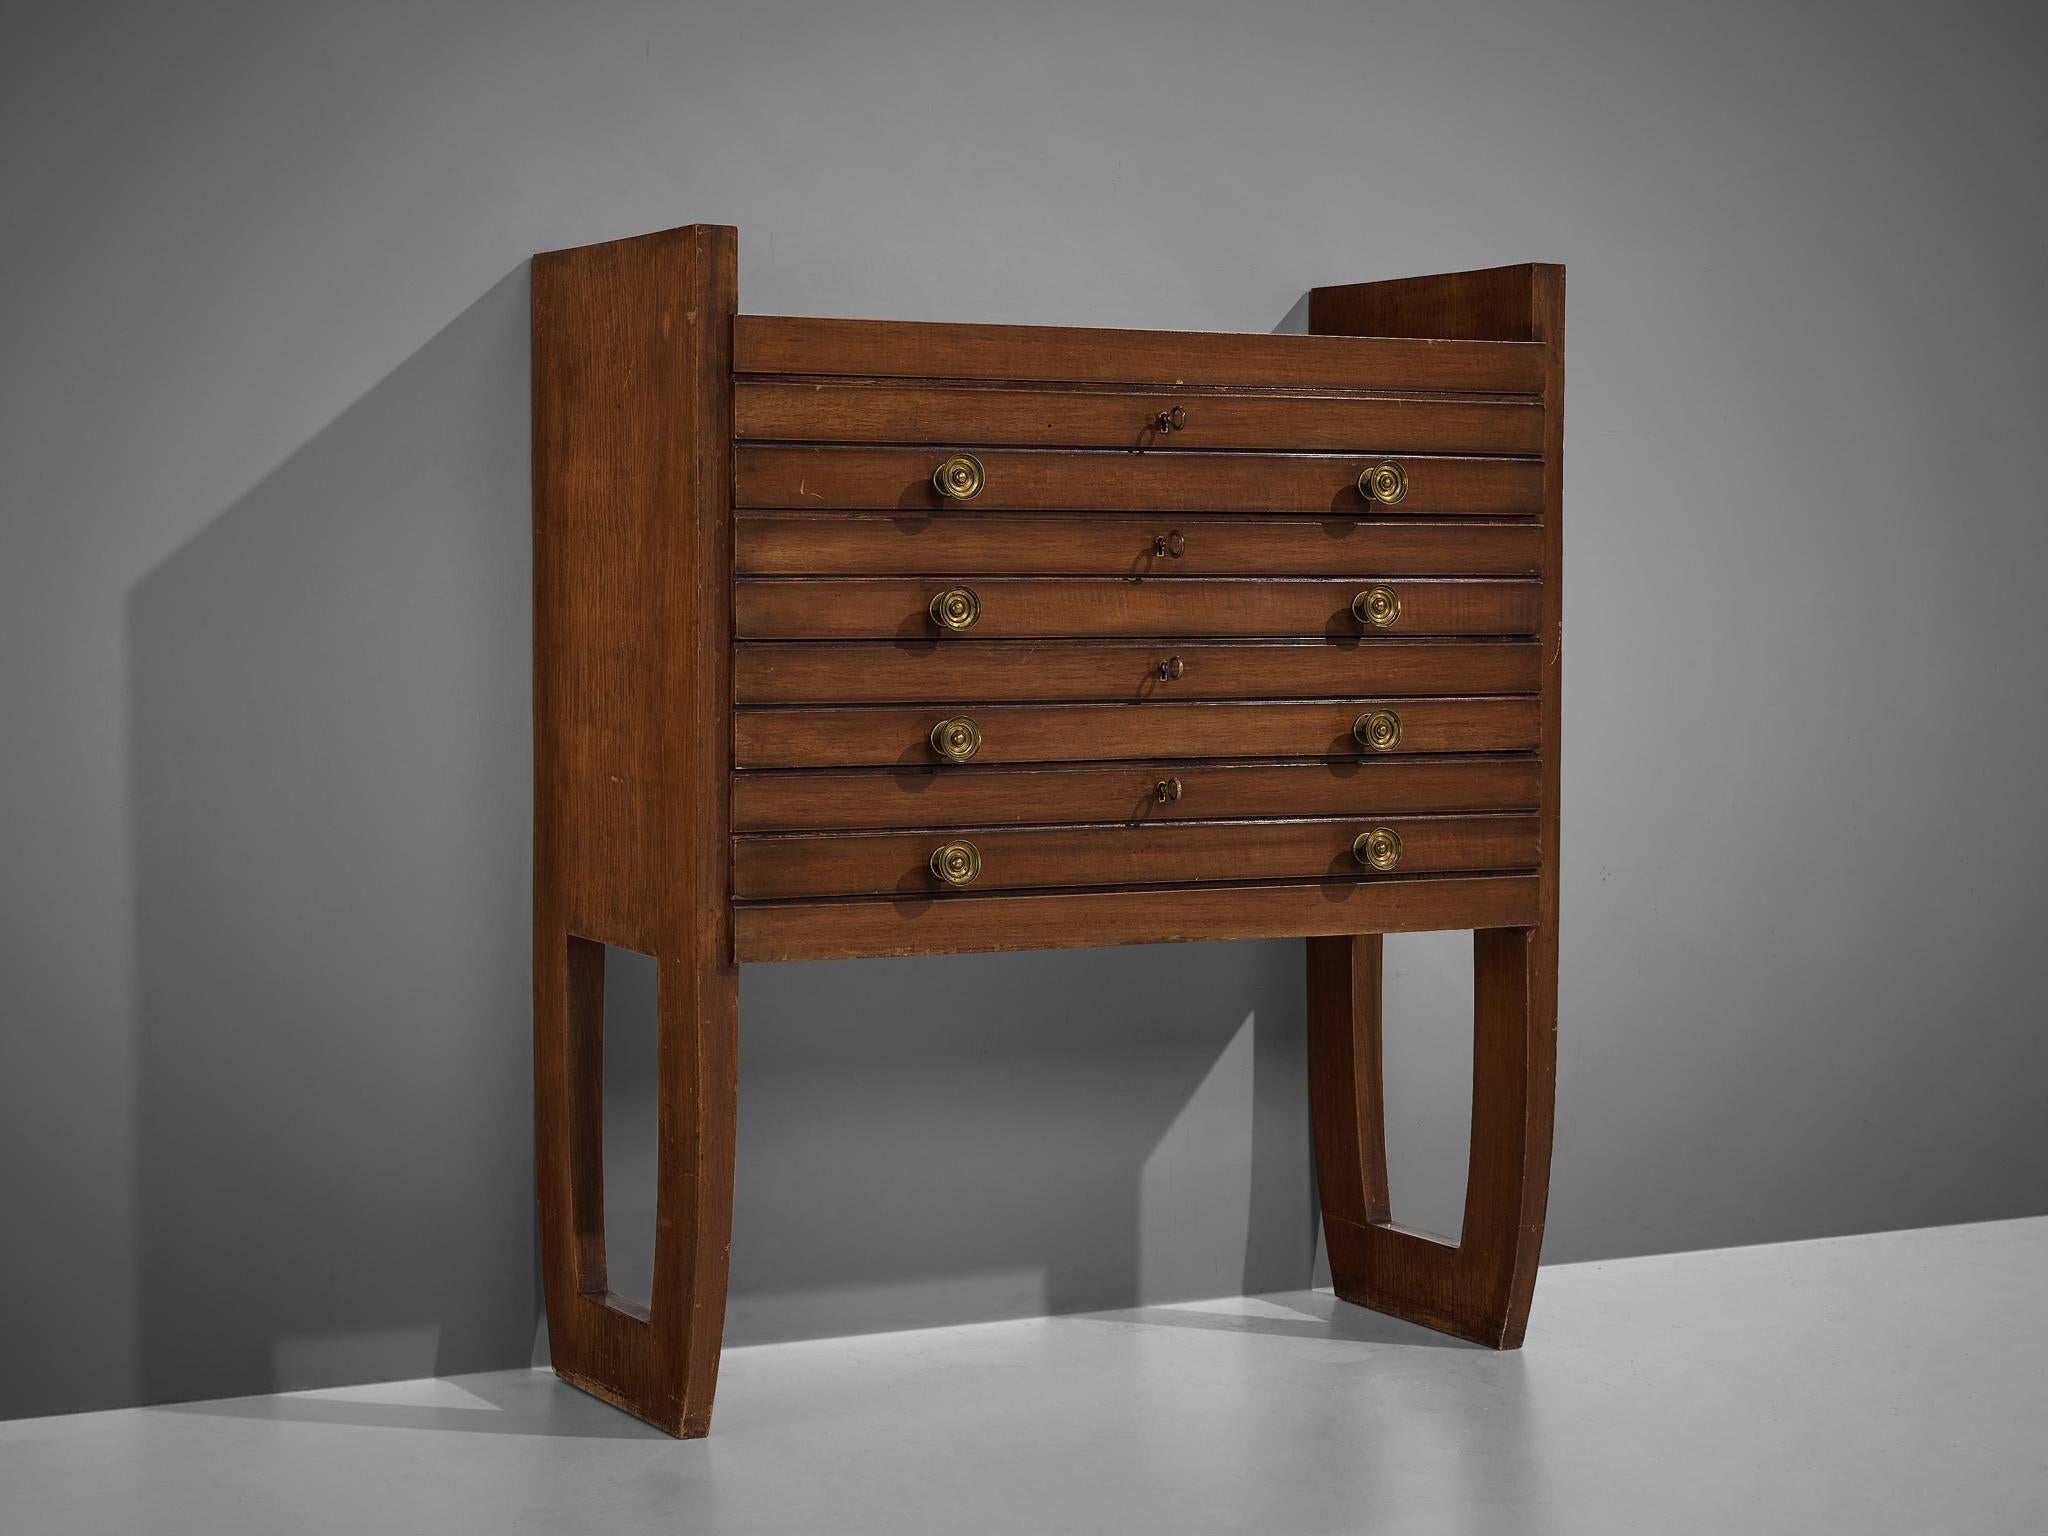 Antonio Cassi Ramelli, chest of drawers, walnut, brass, Italy, 1940s.

This Art Deco chest of drawers is designed by the Italian designer Antonio Cassi Ramelli; a contemporary of Paulo Buffa and whom he collaborated with during the early period of